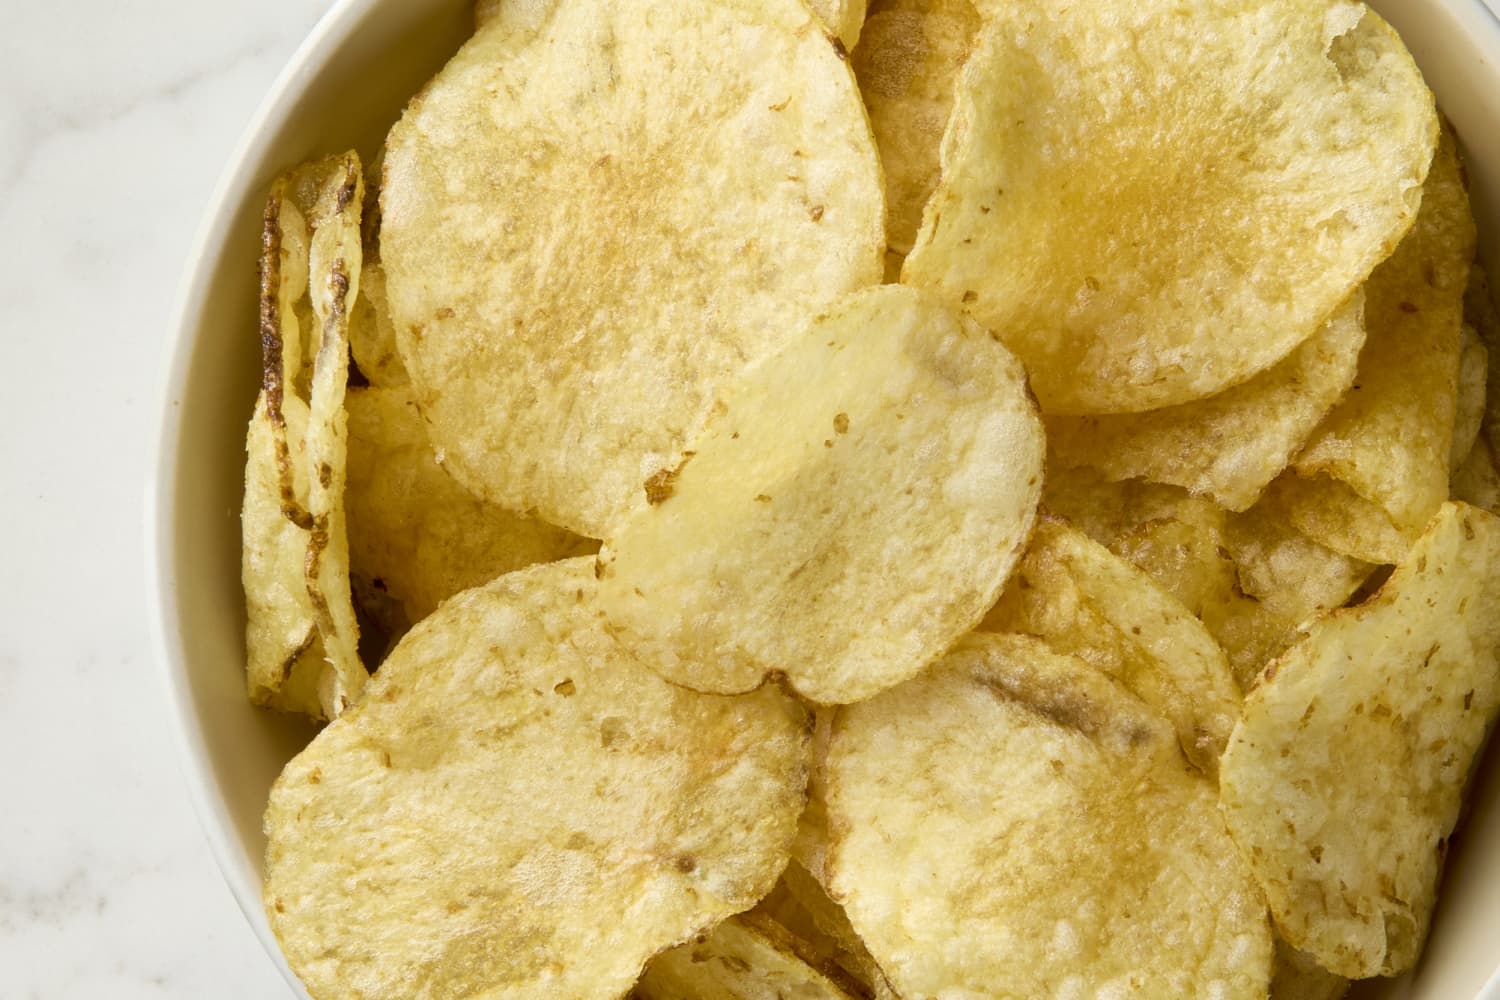 We Asked 3 Chefs to Name the Best Potato Chips, and They All Said the Same Thing